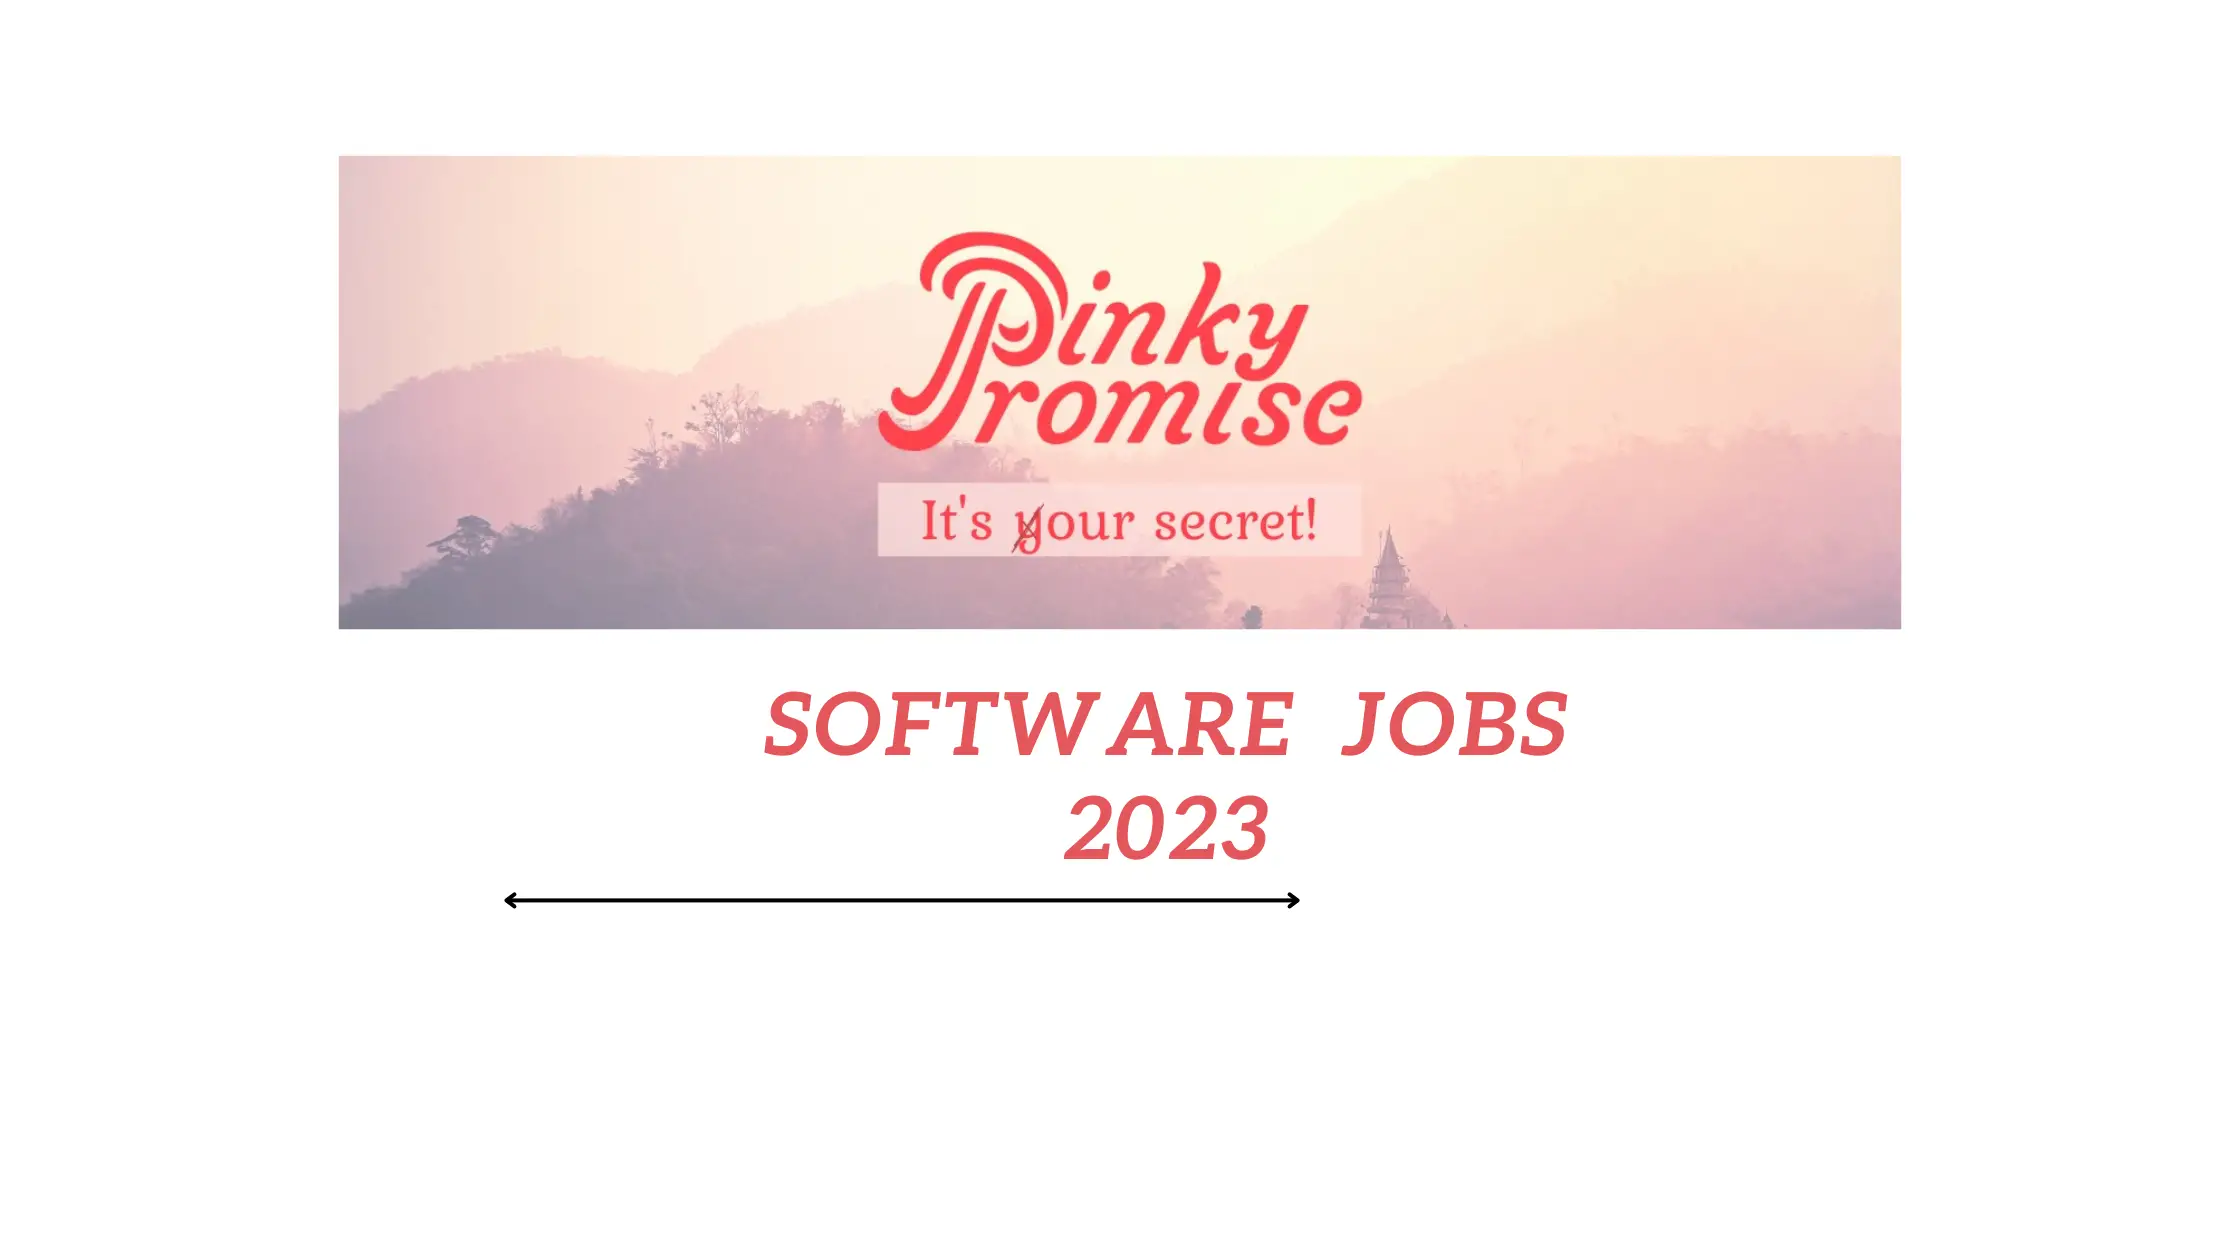 Software Engineer Job 2023 by Pinky Promise - Join Our Team